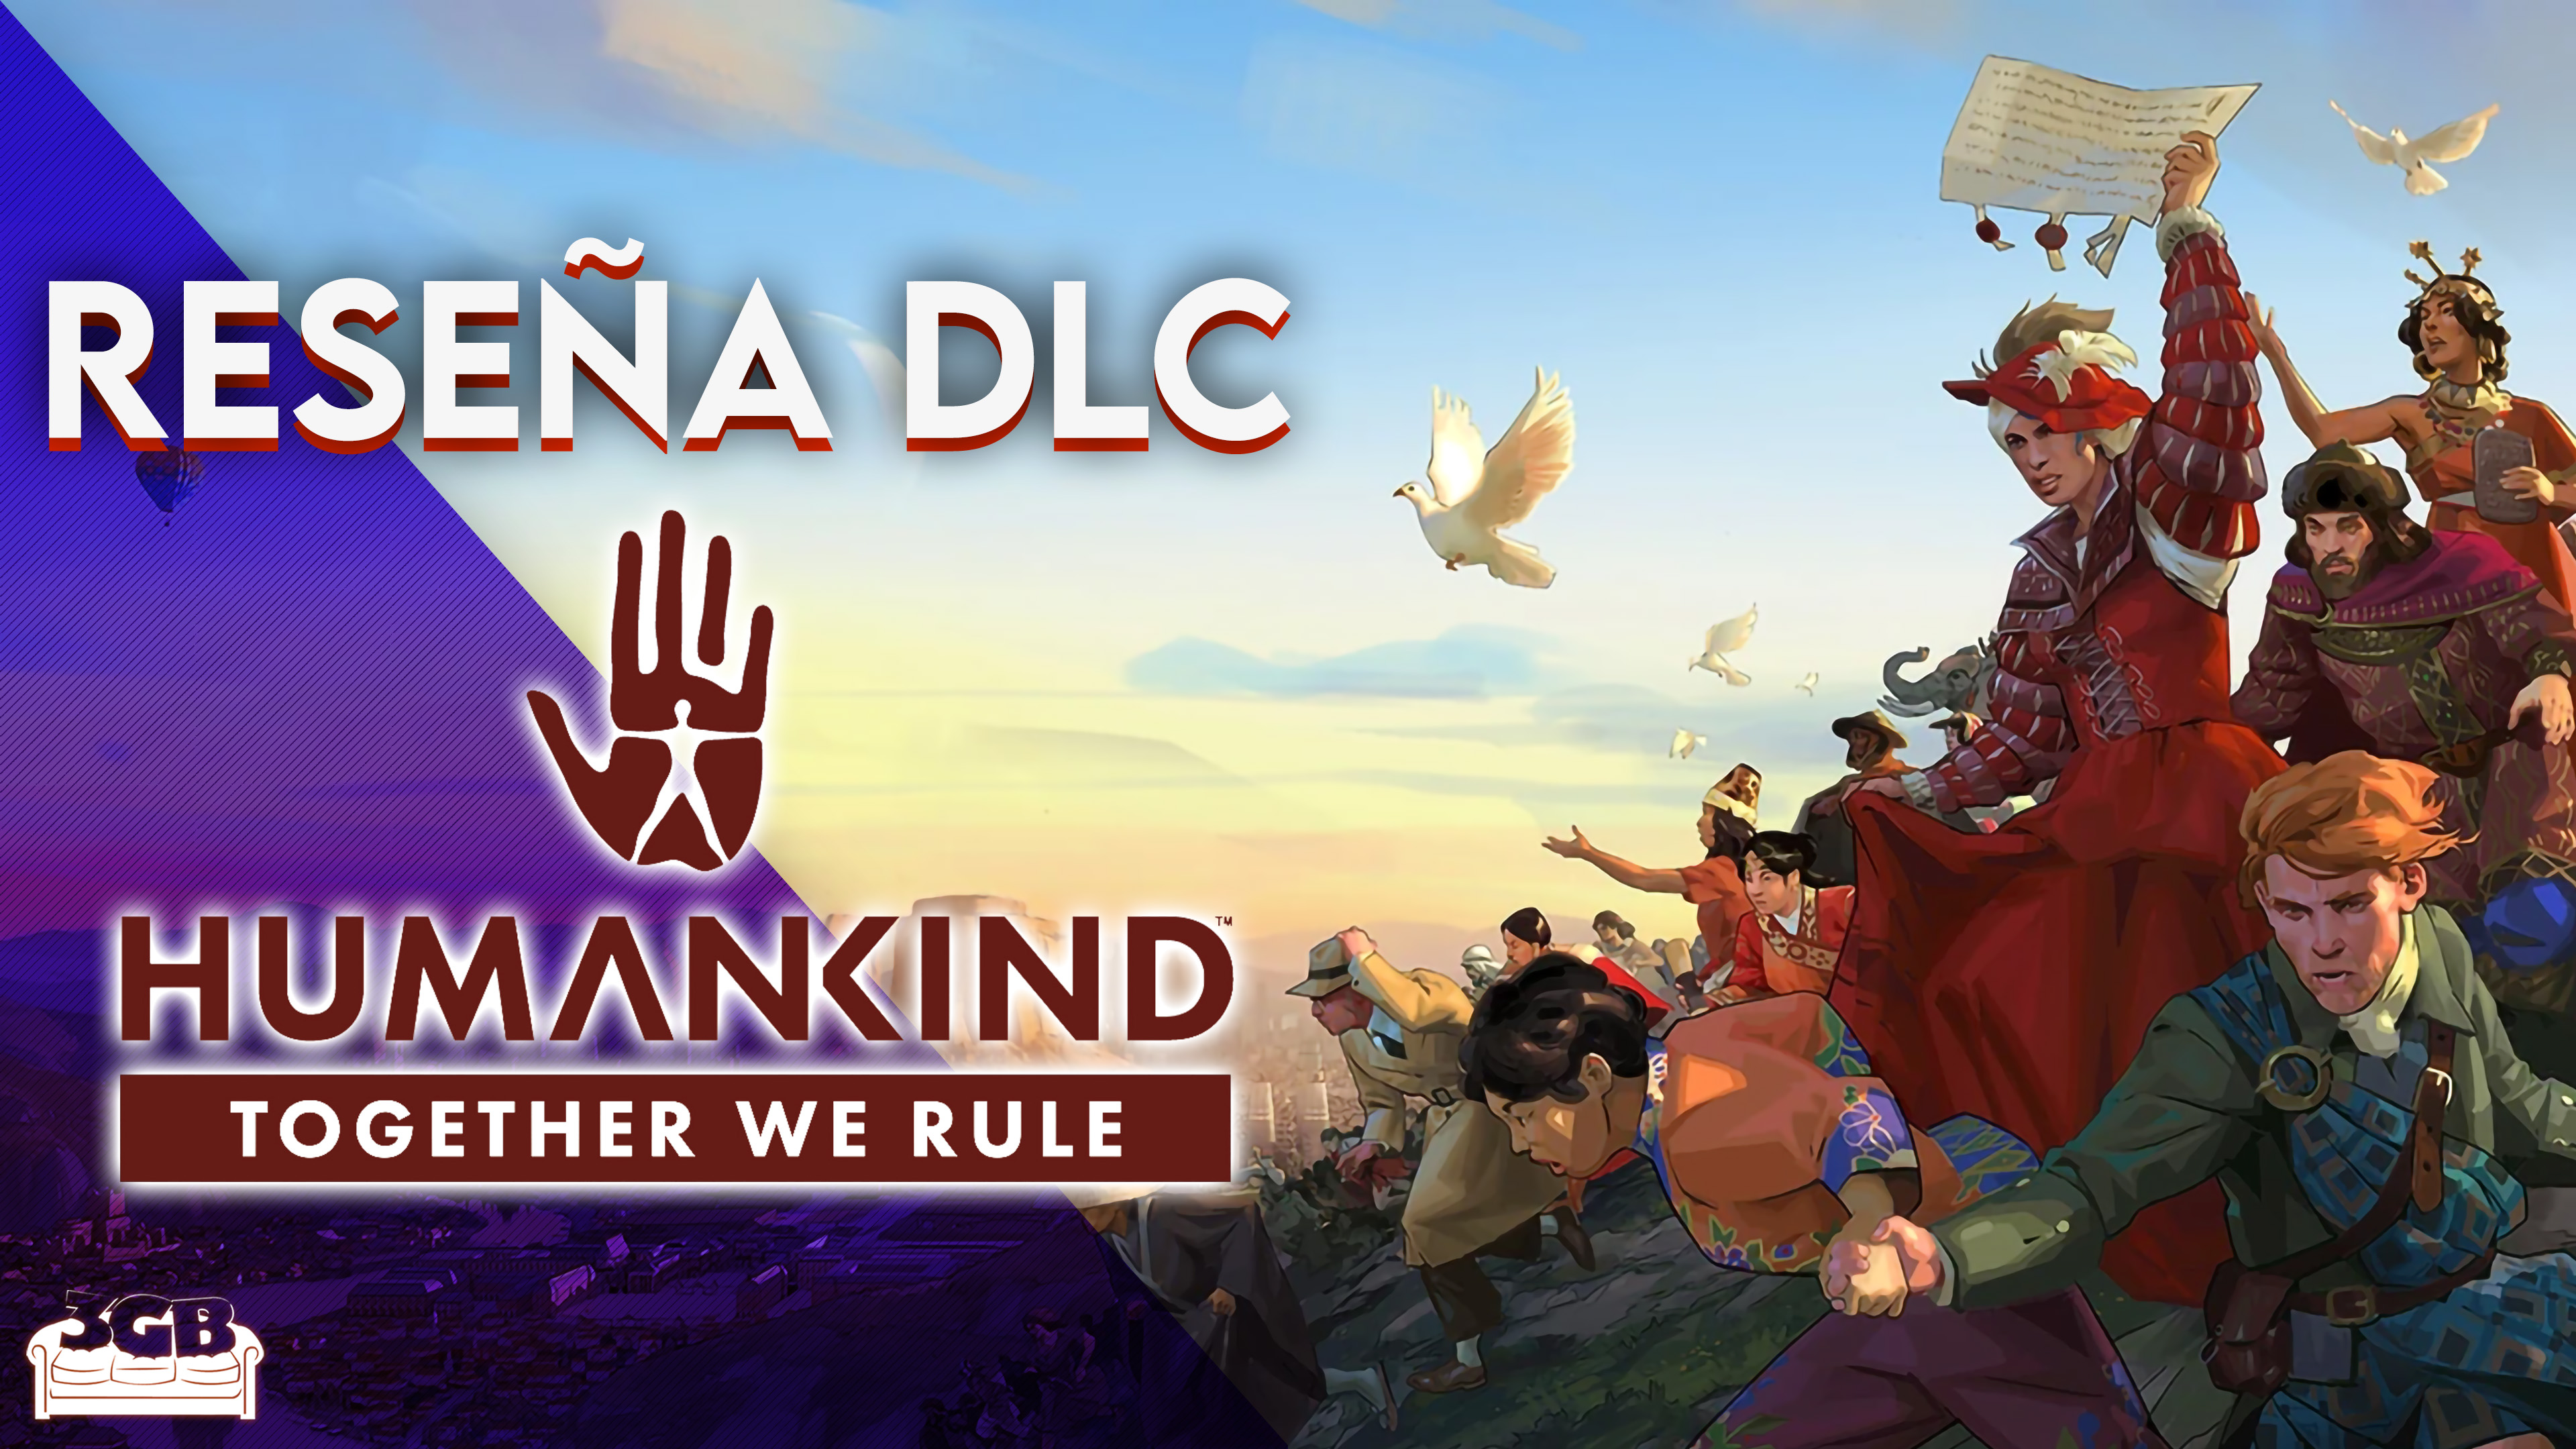 Reseña DLC Humankind: Together We Rule – Intento Diplomático